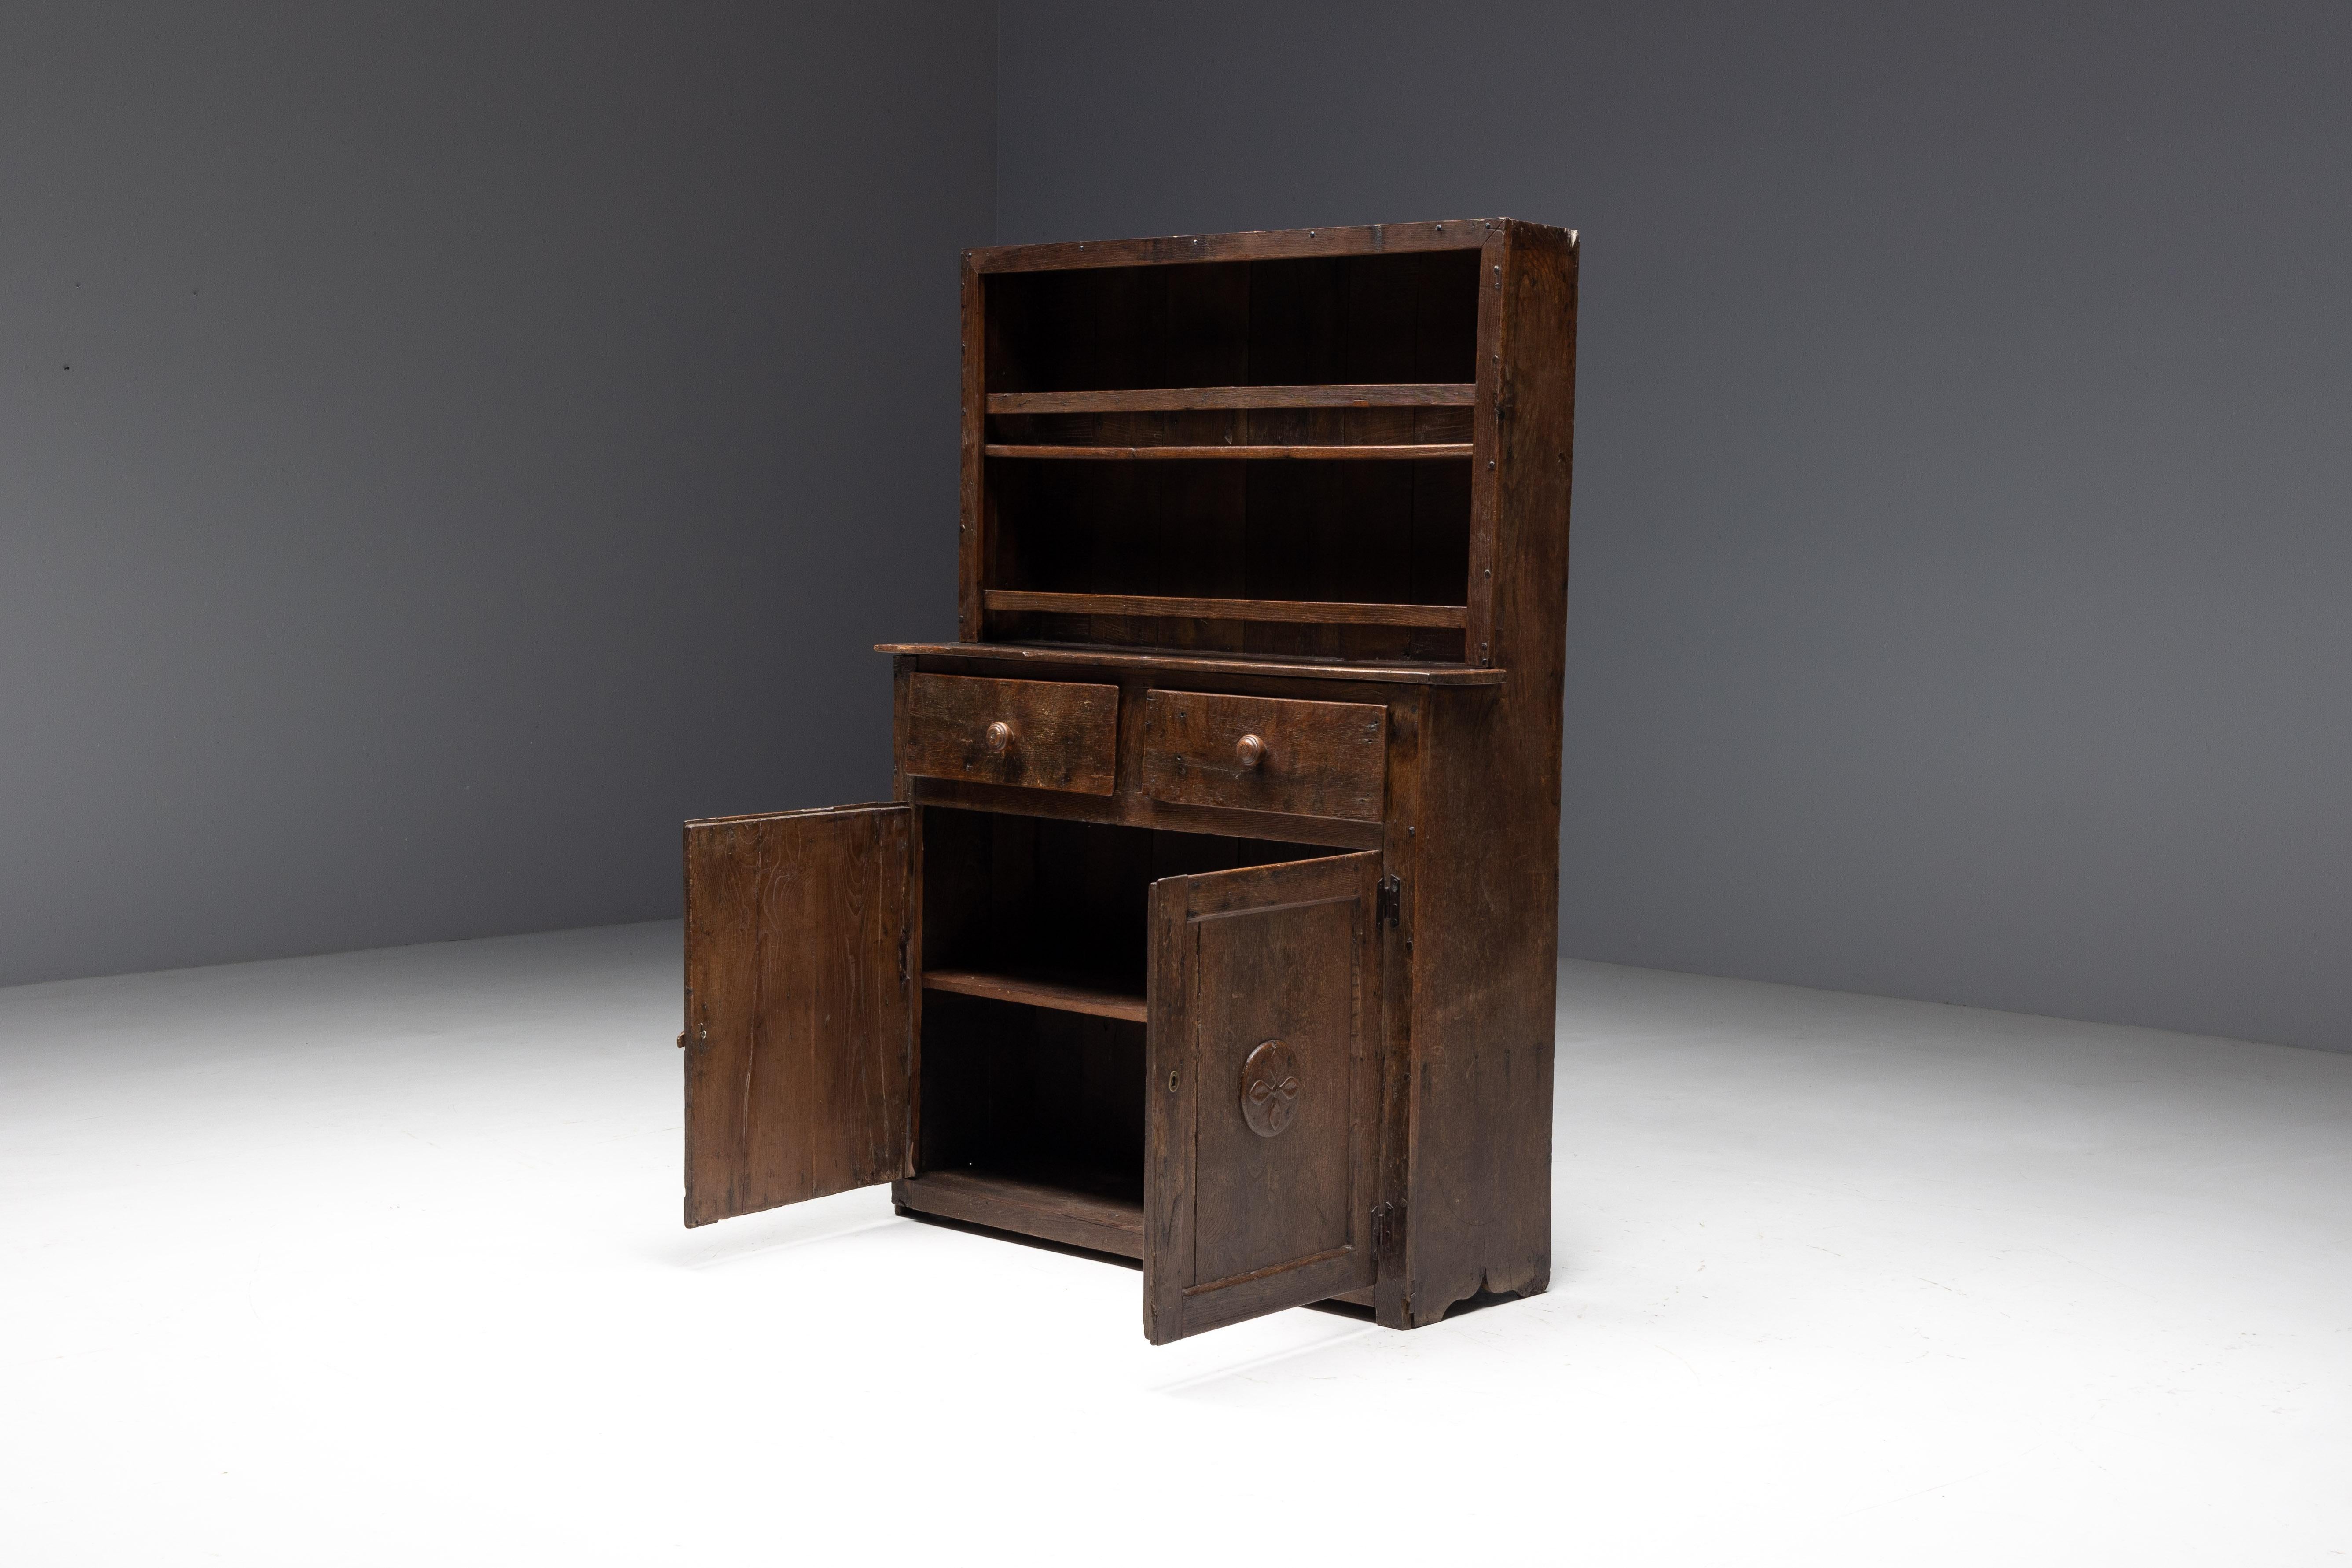 Rustic Travail Populaire Cupboard, France, Early 19th Century For Sale 4